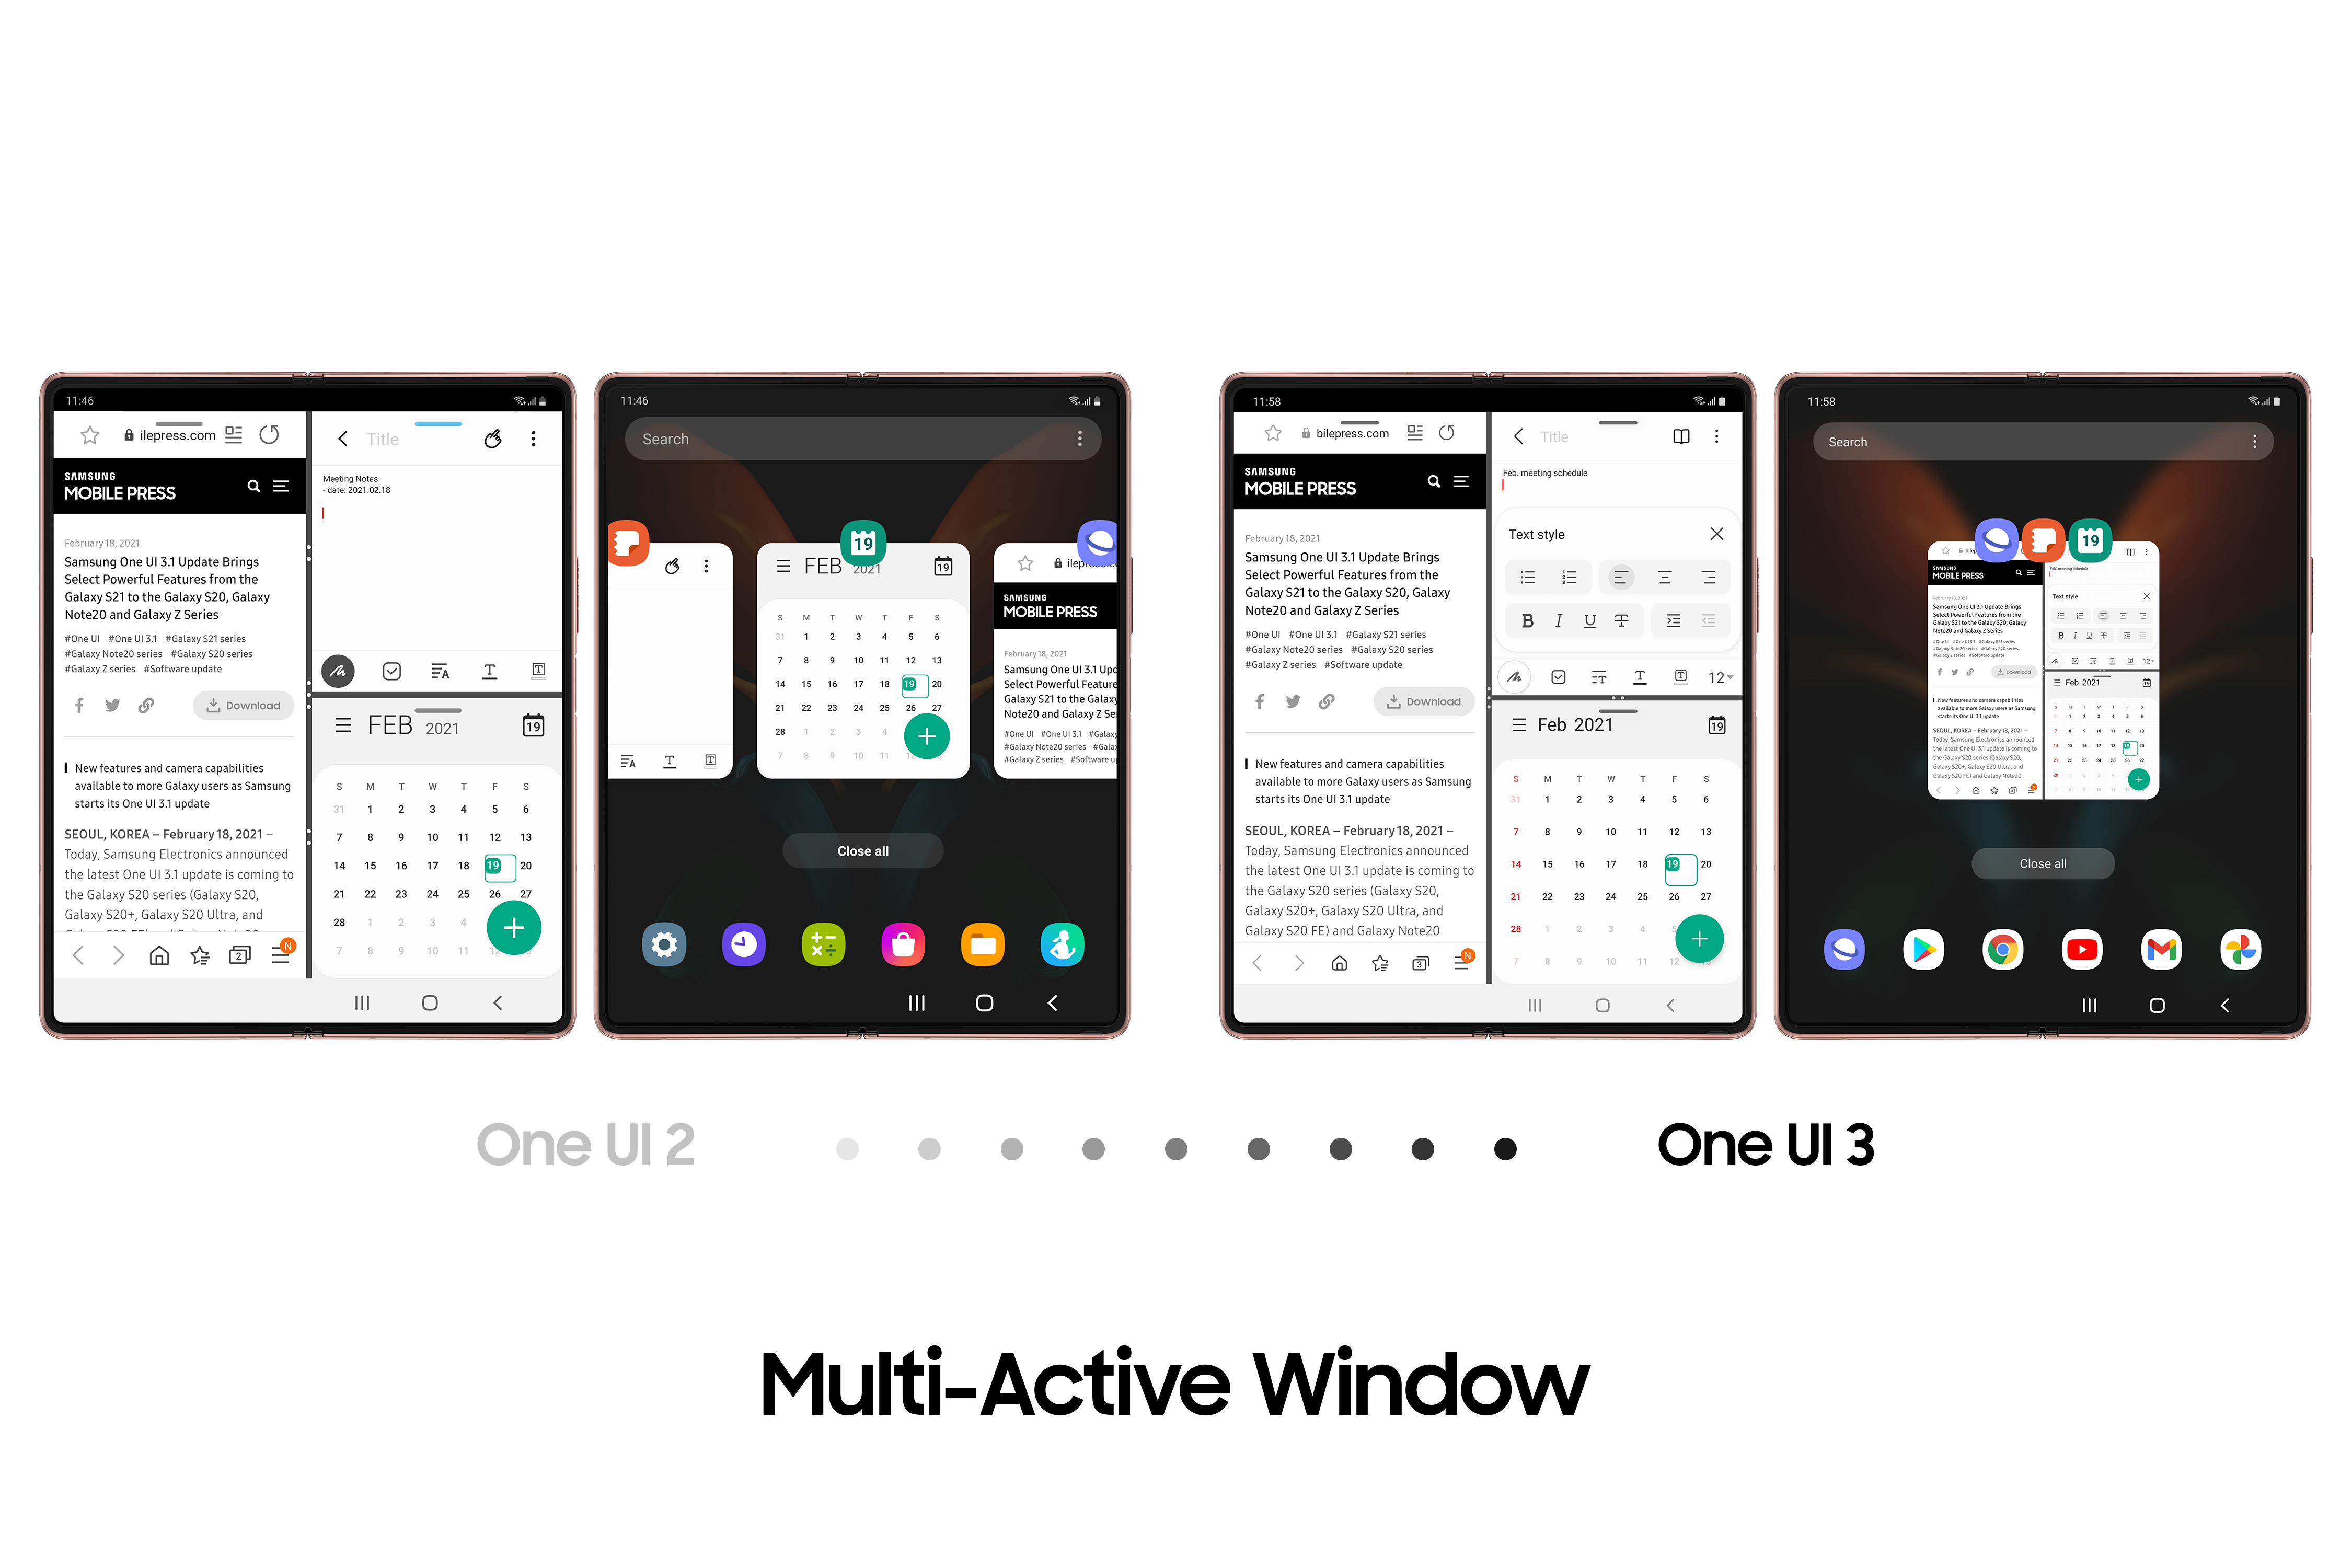 One UI 3 Brings Seamless Continuity and Intuitive Interactions to the Galaxy Z Fold2: Multi-Active Windows from Recents tab